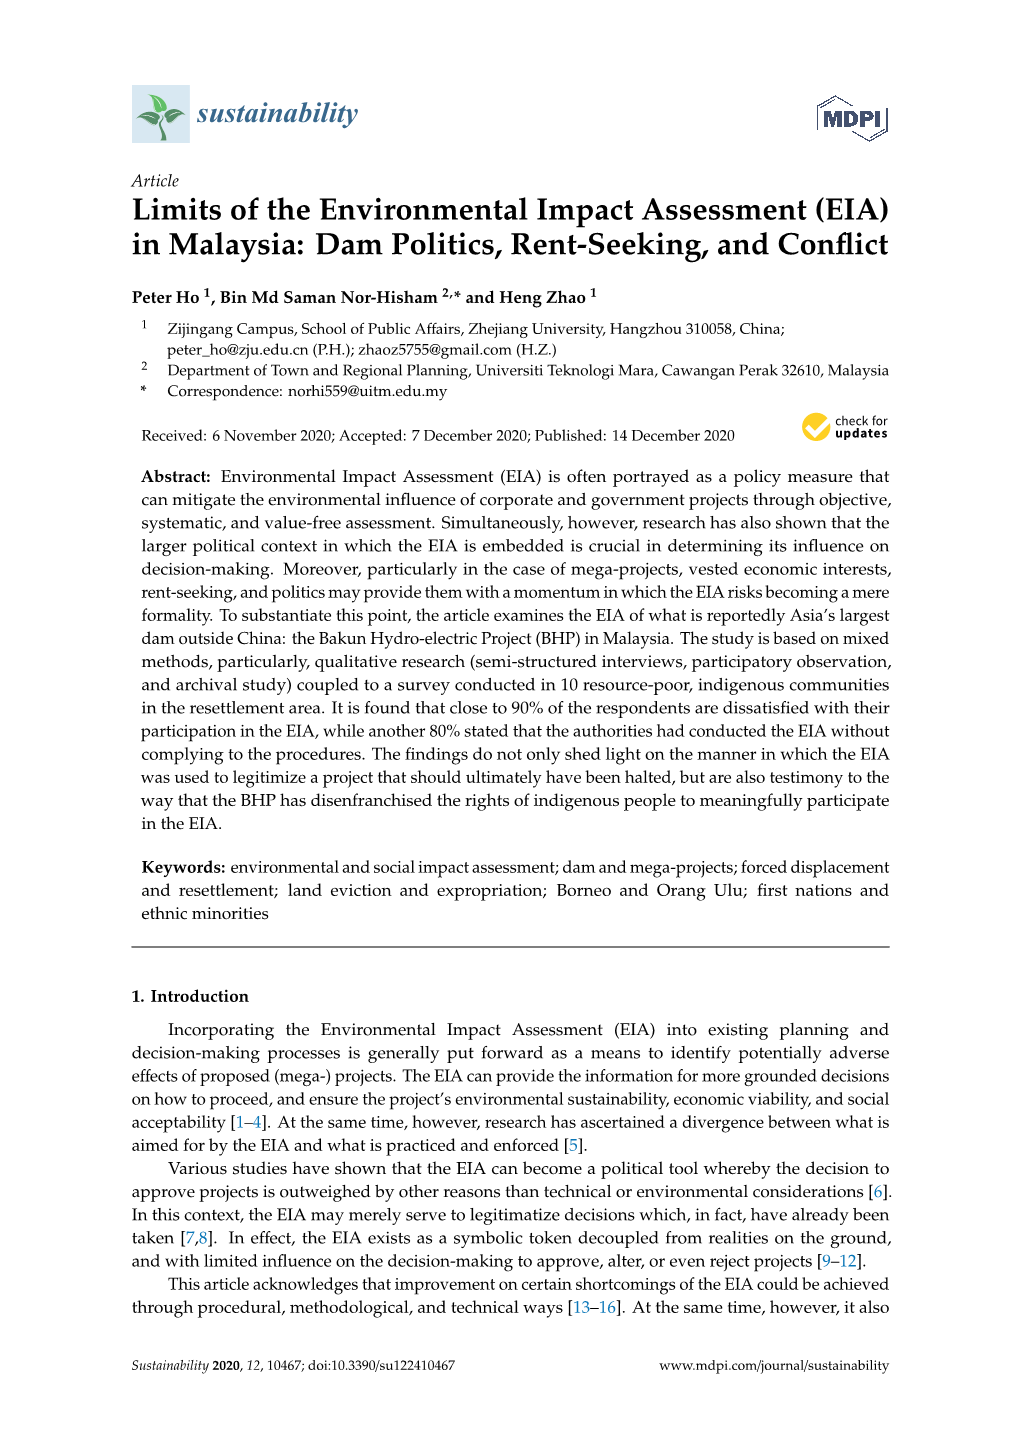 Limits of the Environmental Impact Assessment (EIA) in Malaysia: Dam Politics, Rent-Seeking, and Conﬂict